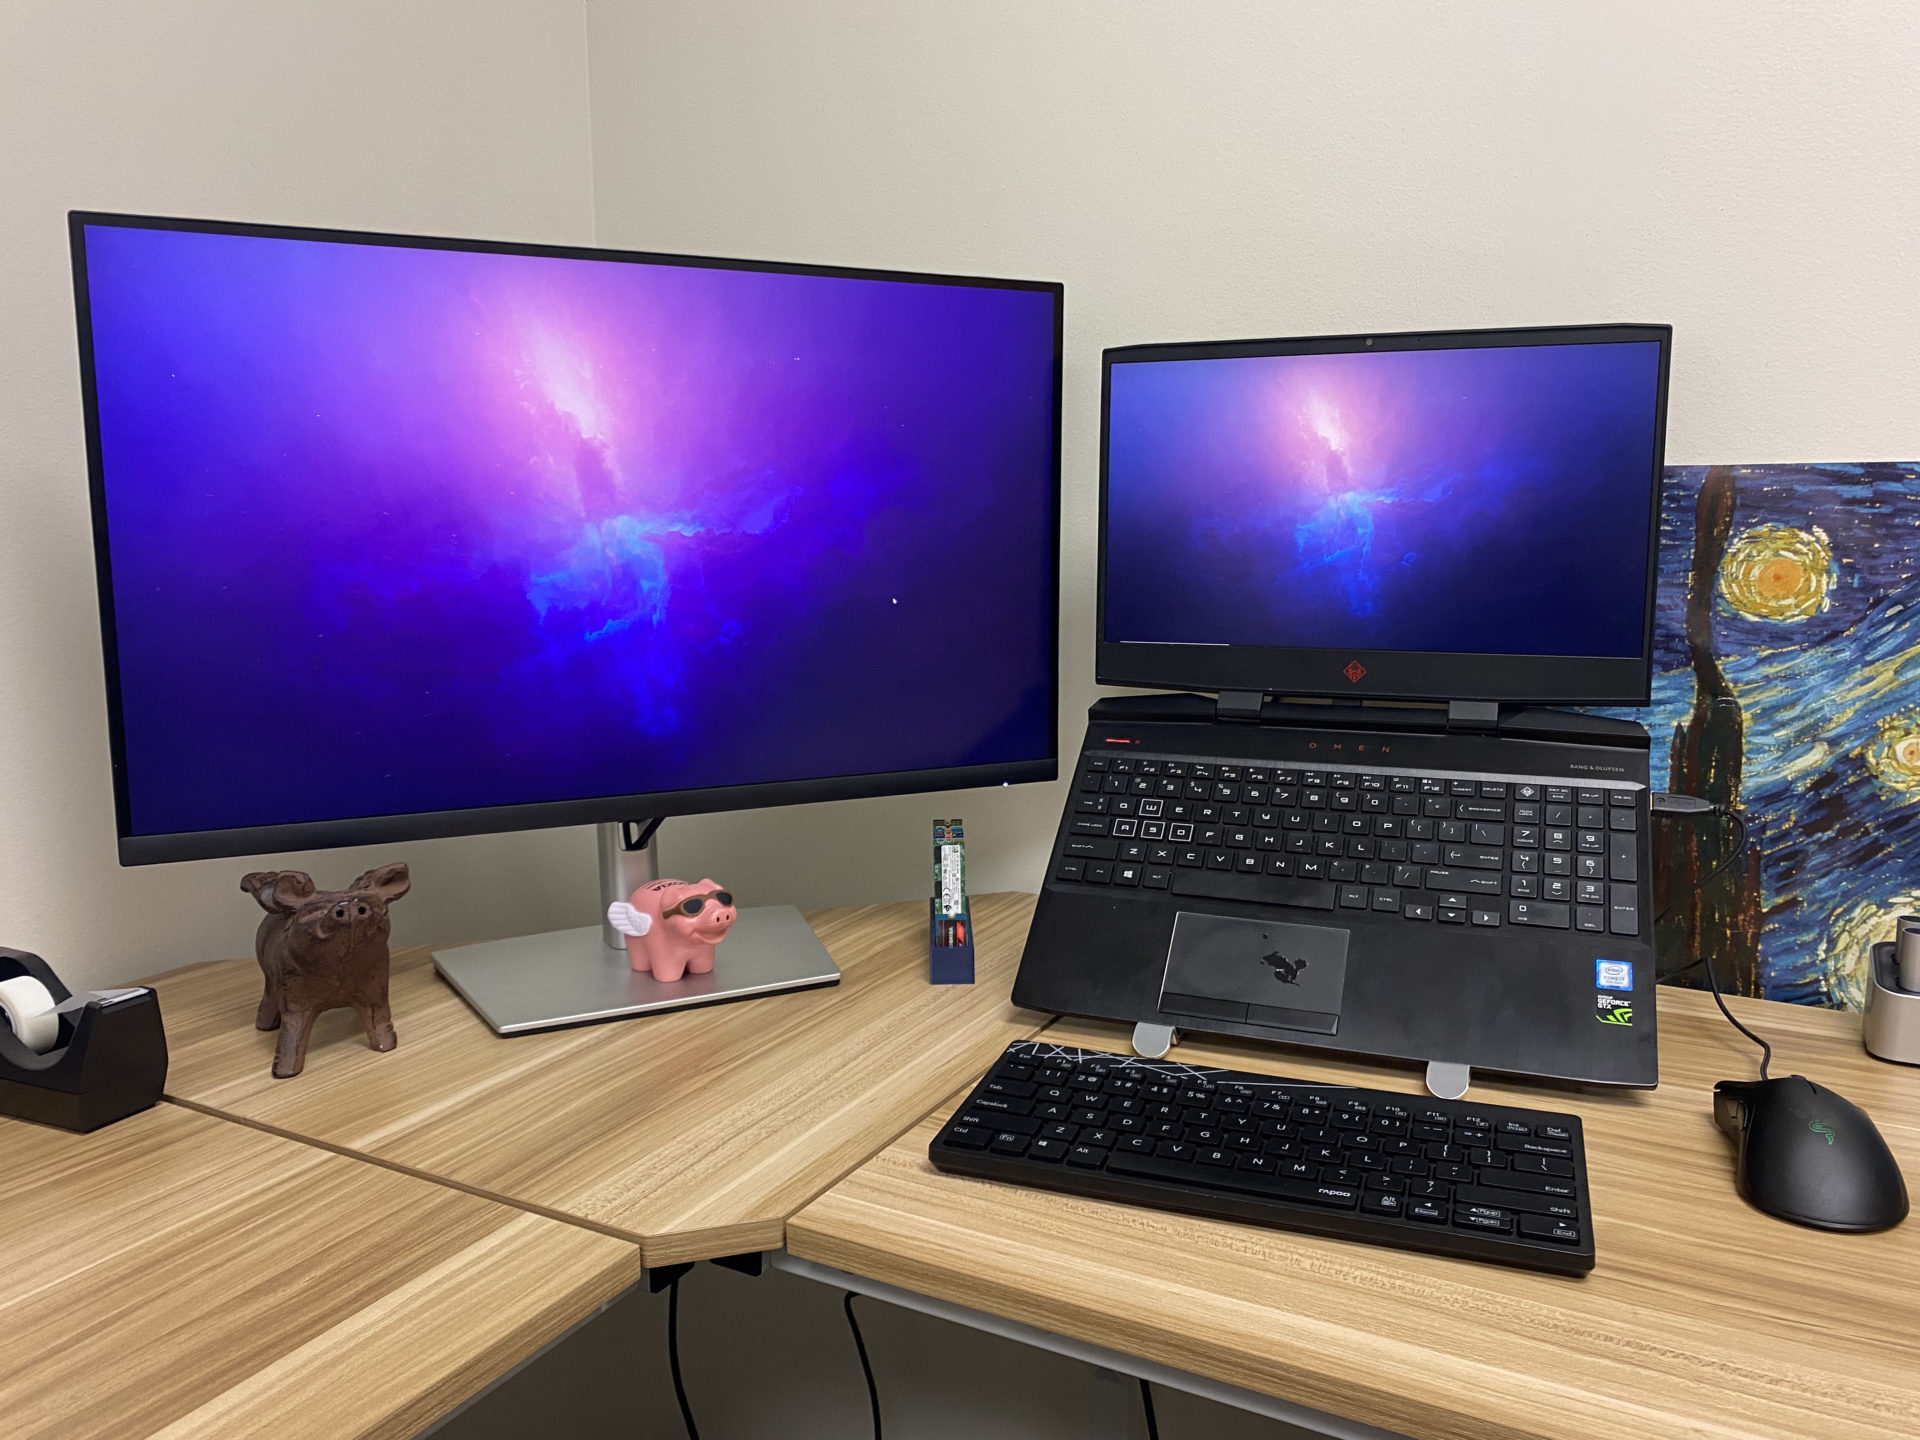 Dell P2723QE review: A solid 4K USB-C hub monitor for home offices